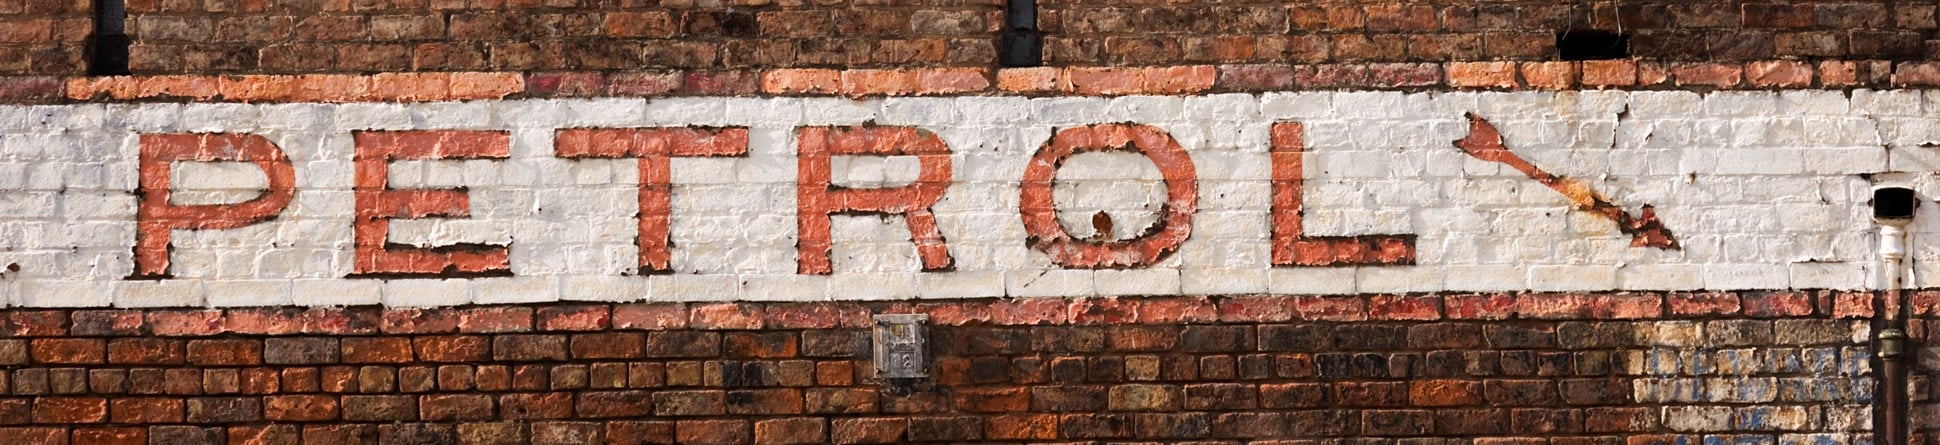 Image of a white and red sign reading 'petrol' on the front of a brick building